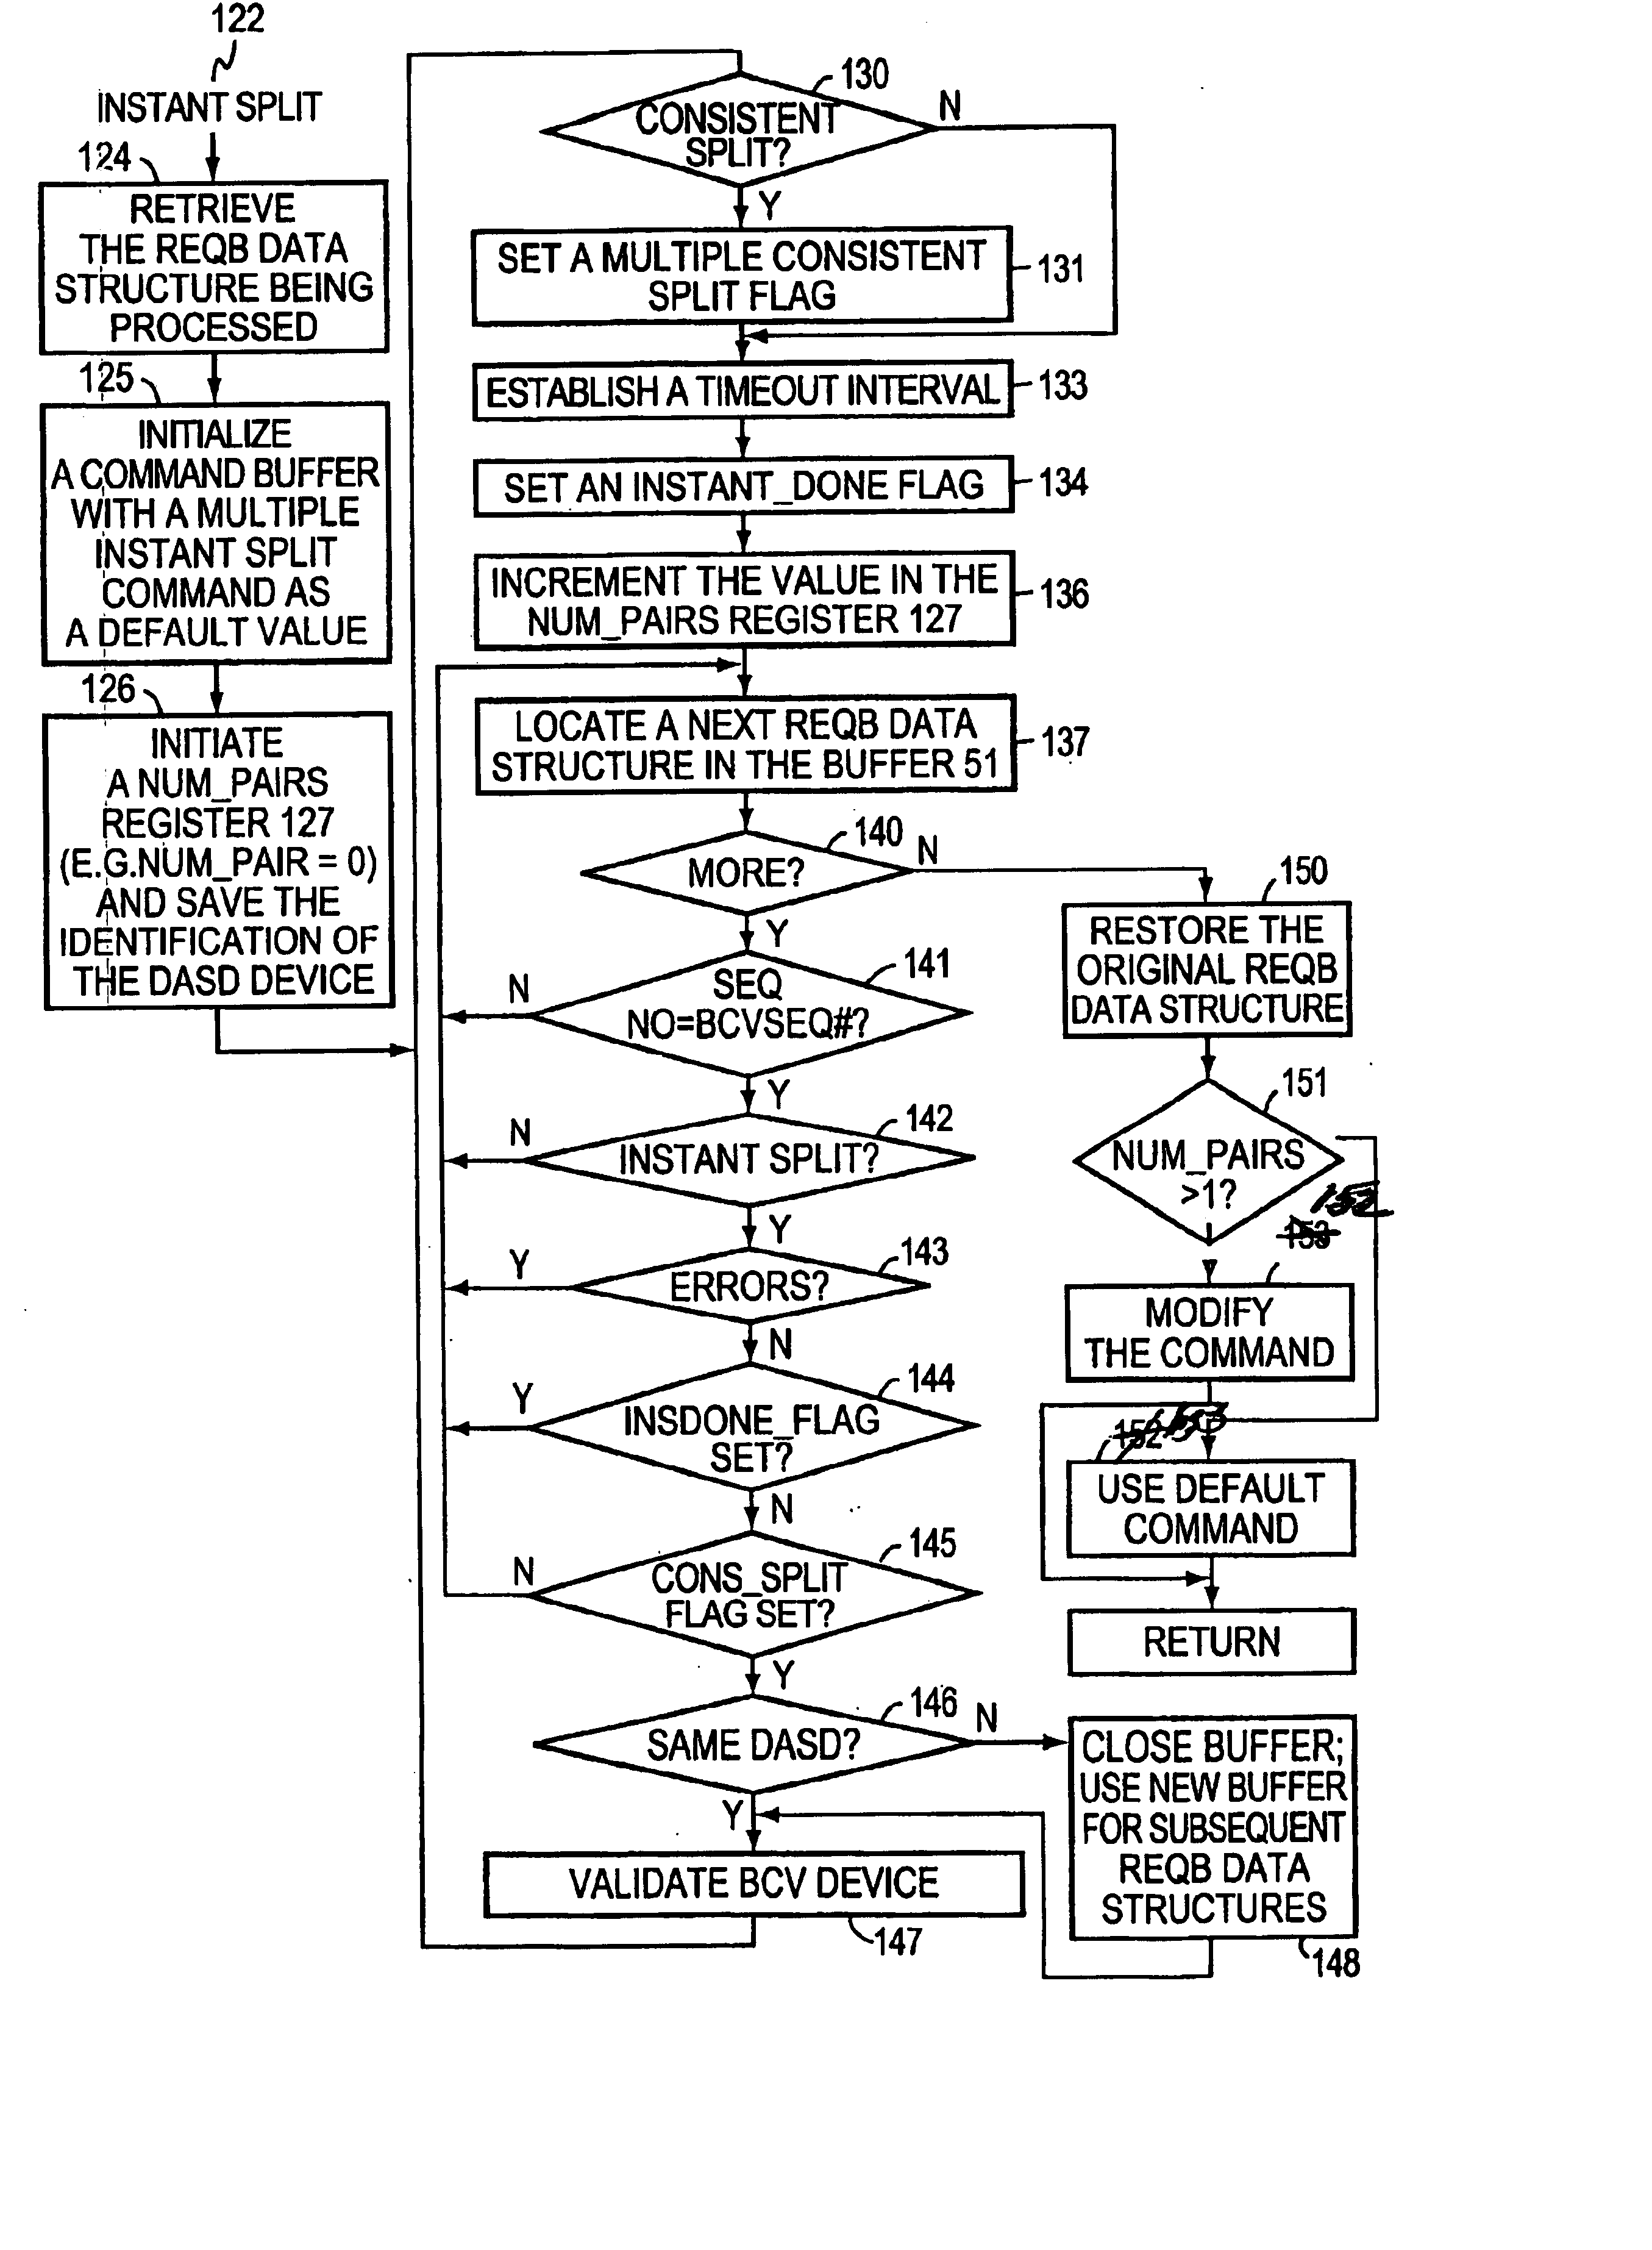 Method and apparatus for enabling consistent ancillary disk array storage device operations with respect to a main application